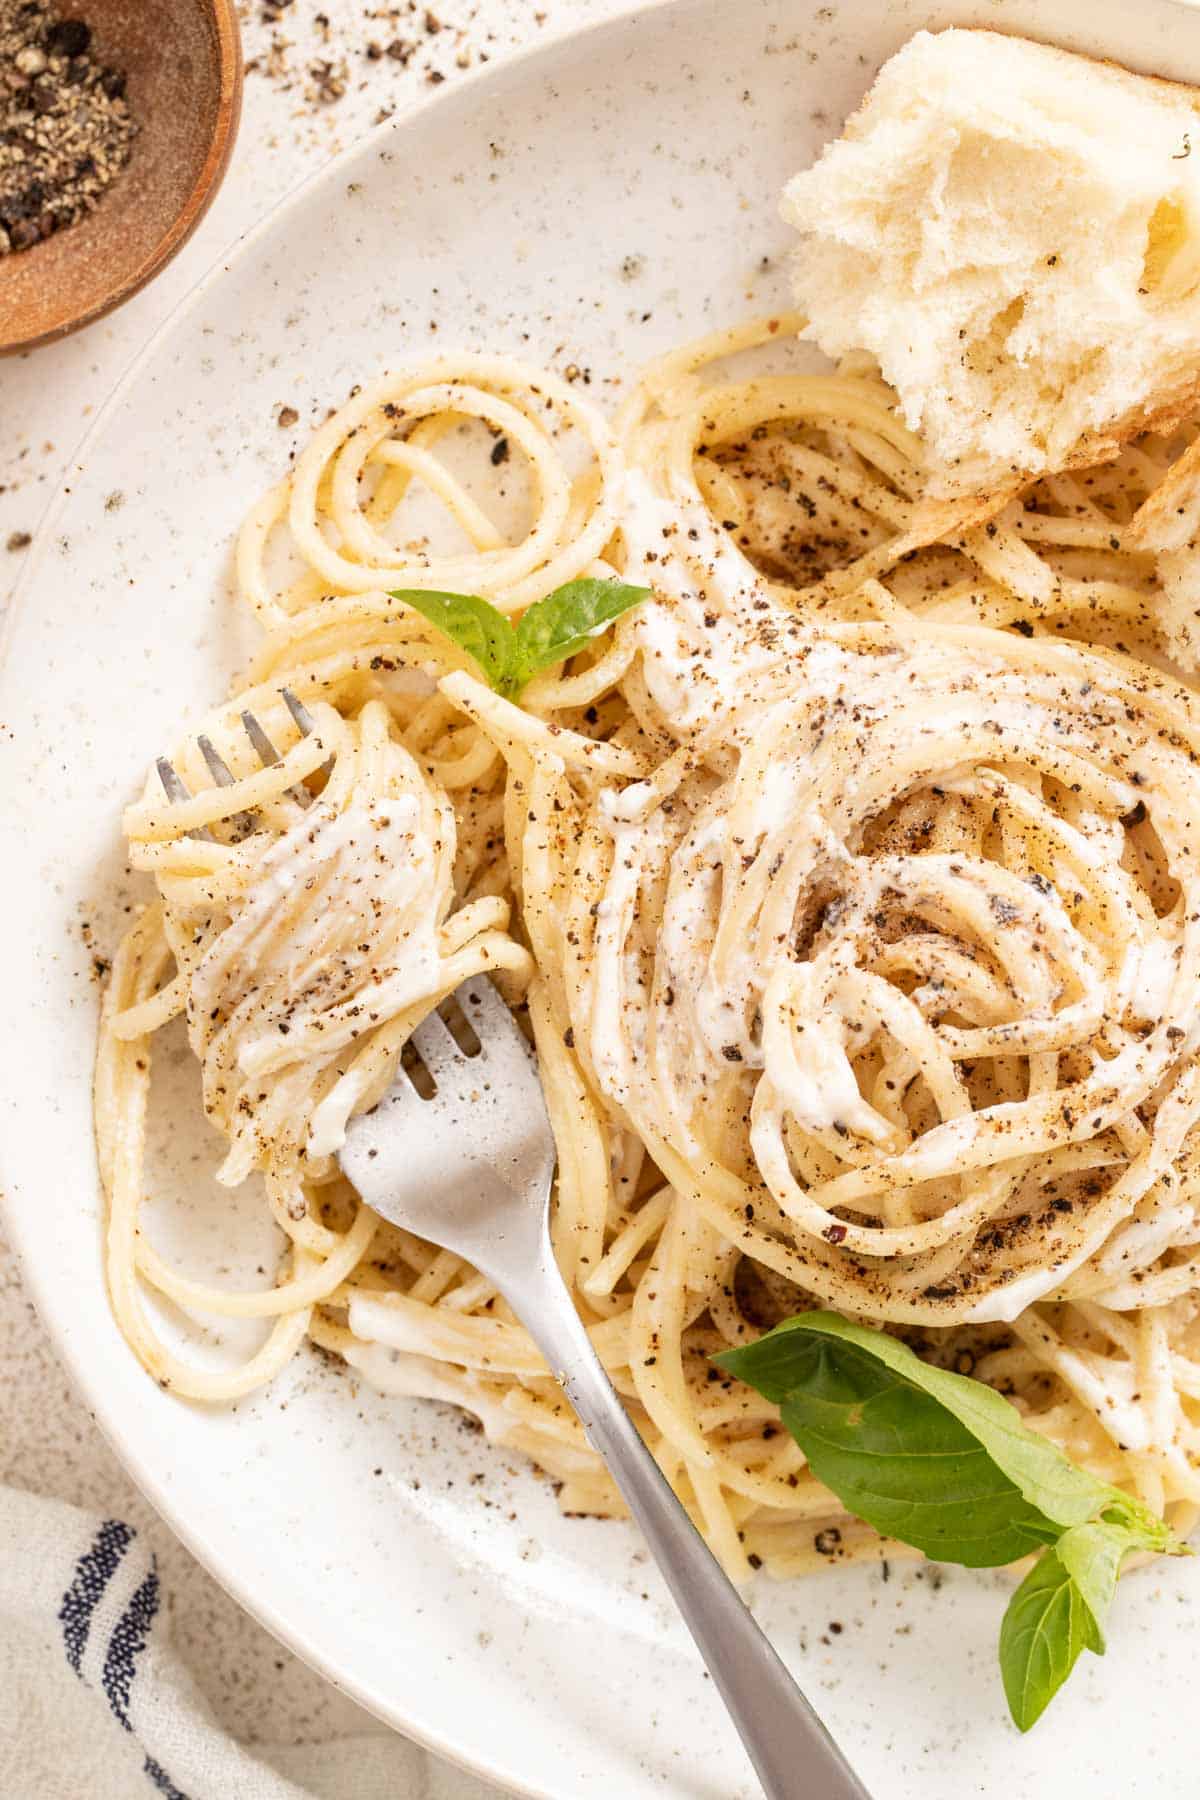 Creamy pasta twirled around a fork next to a slice of bread and fresh basil.